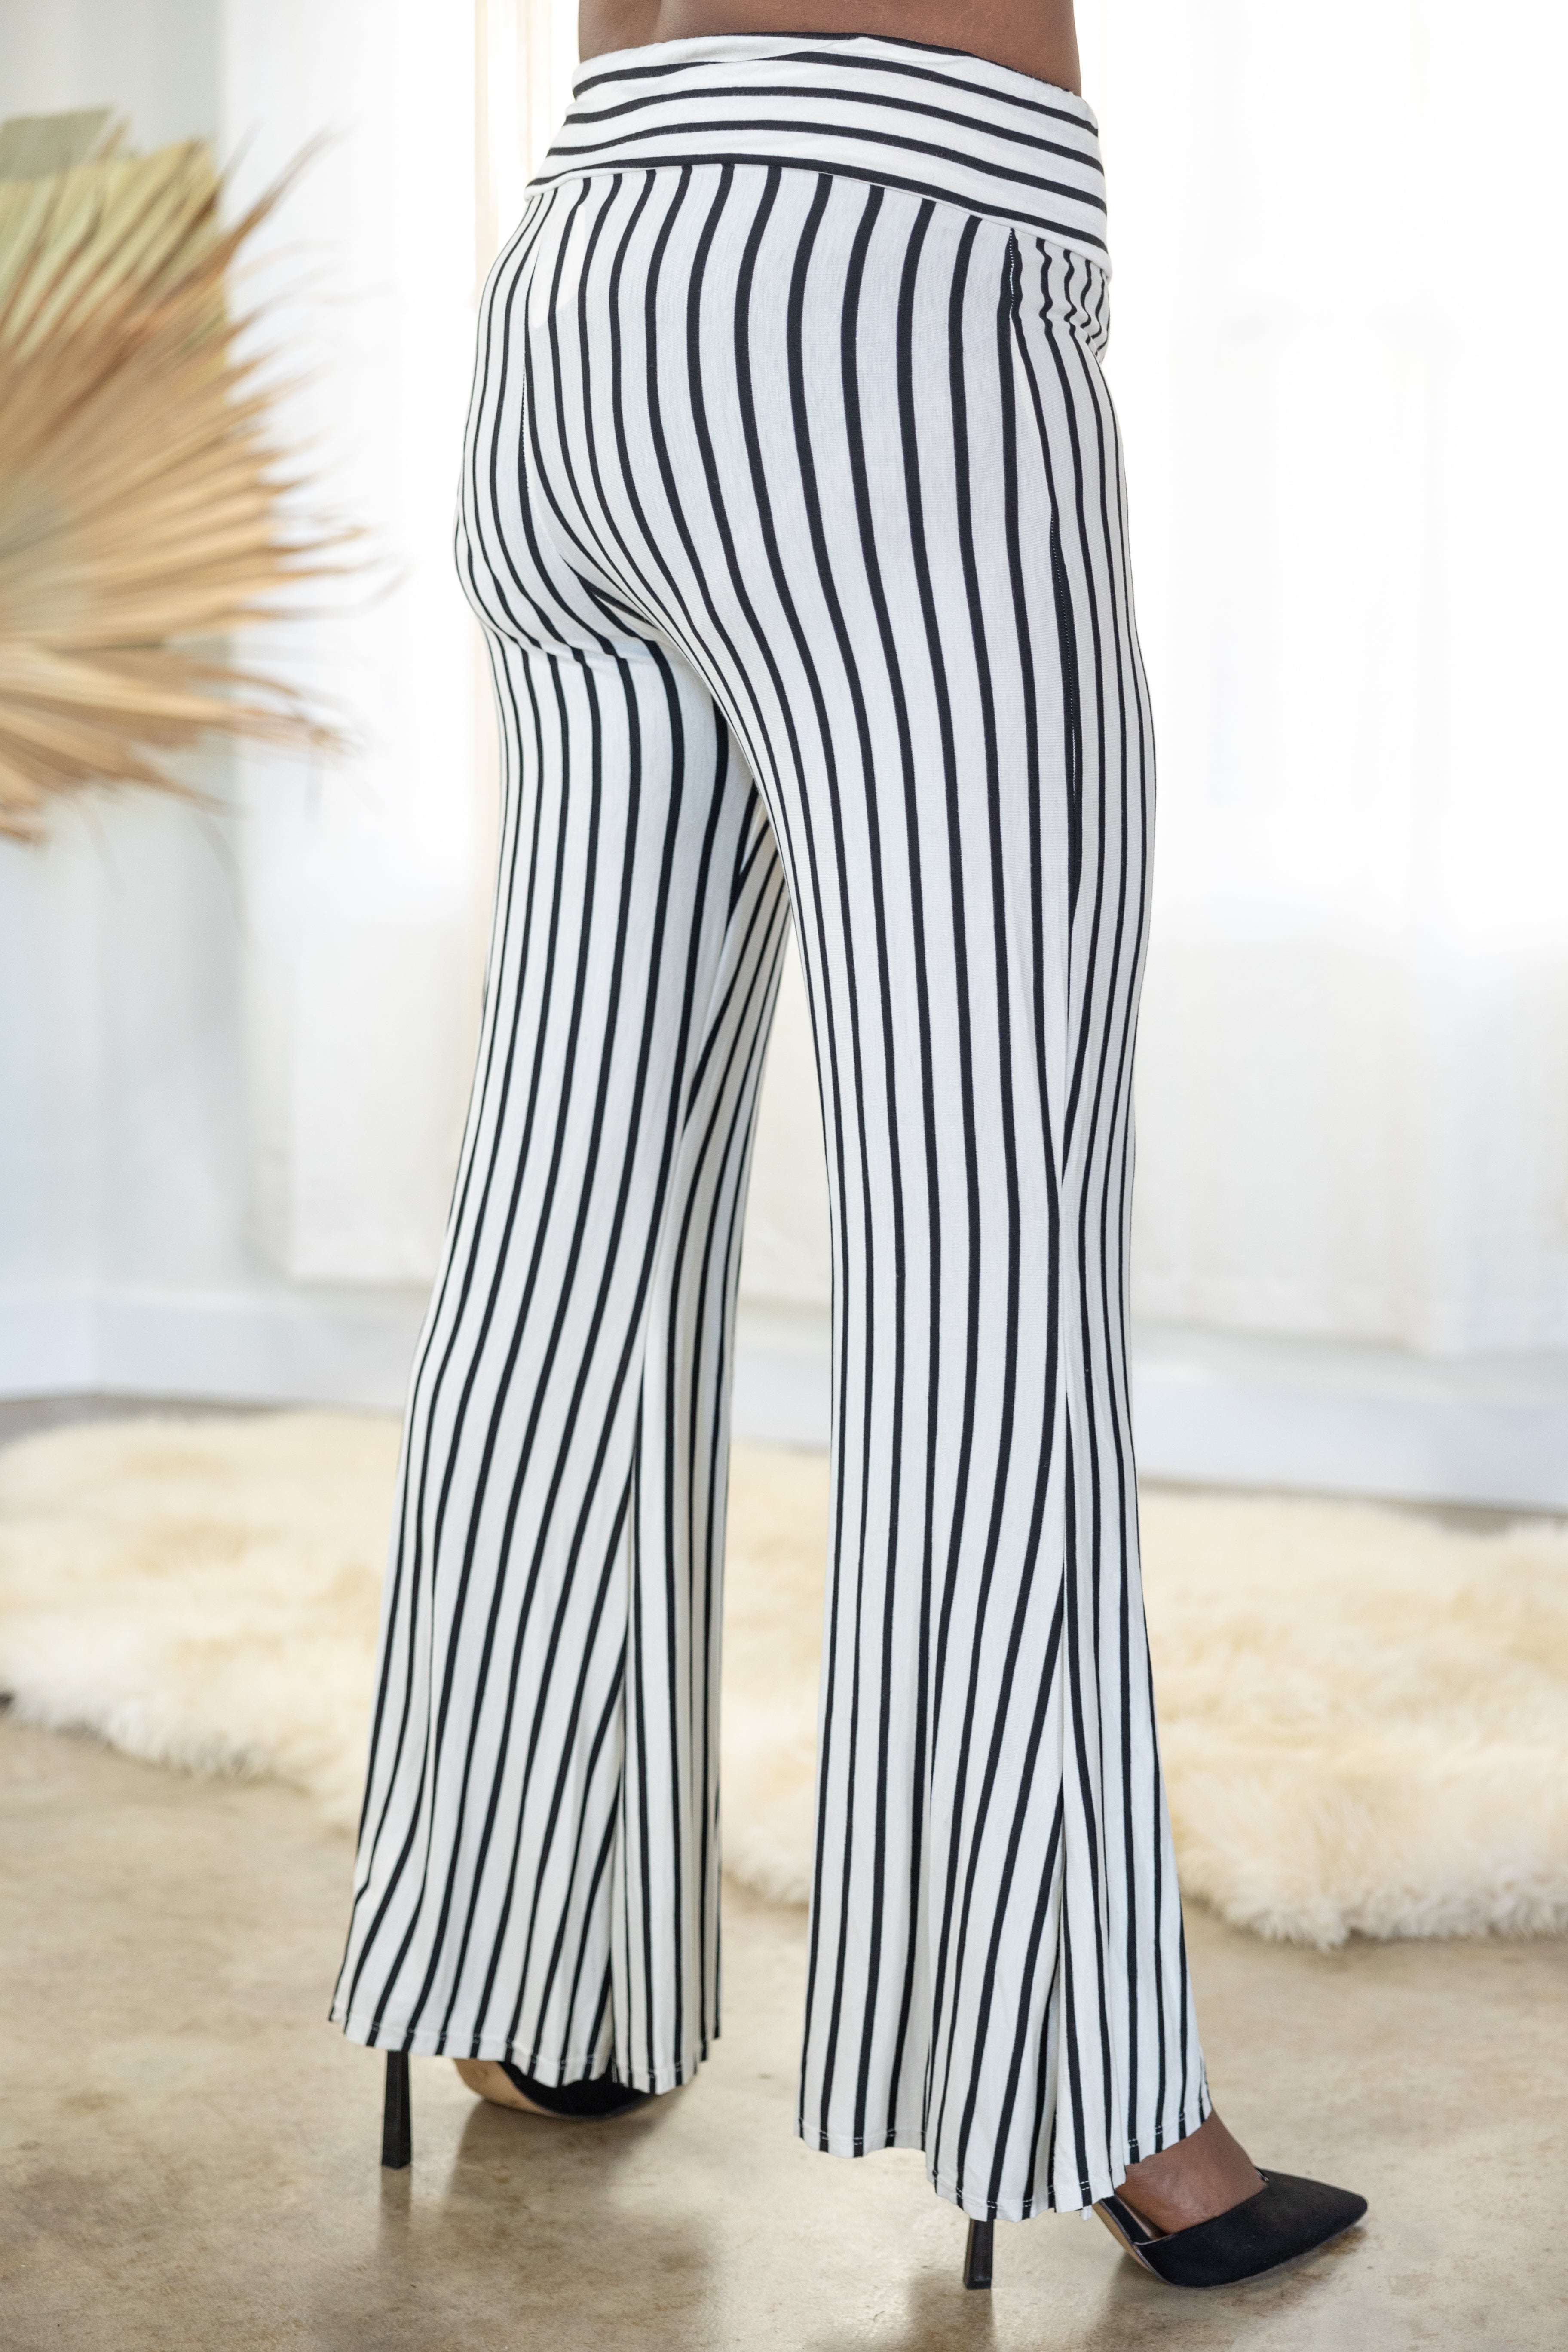 Stay Between The Lines - Flare Pants